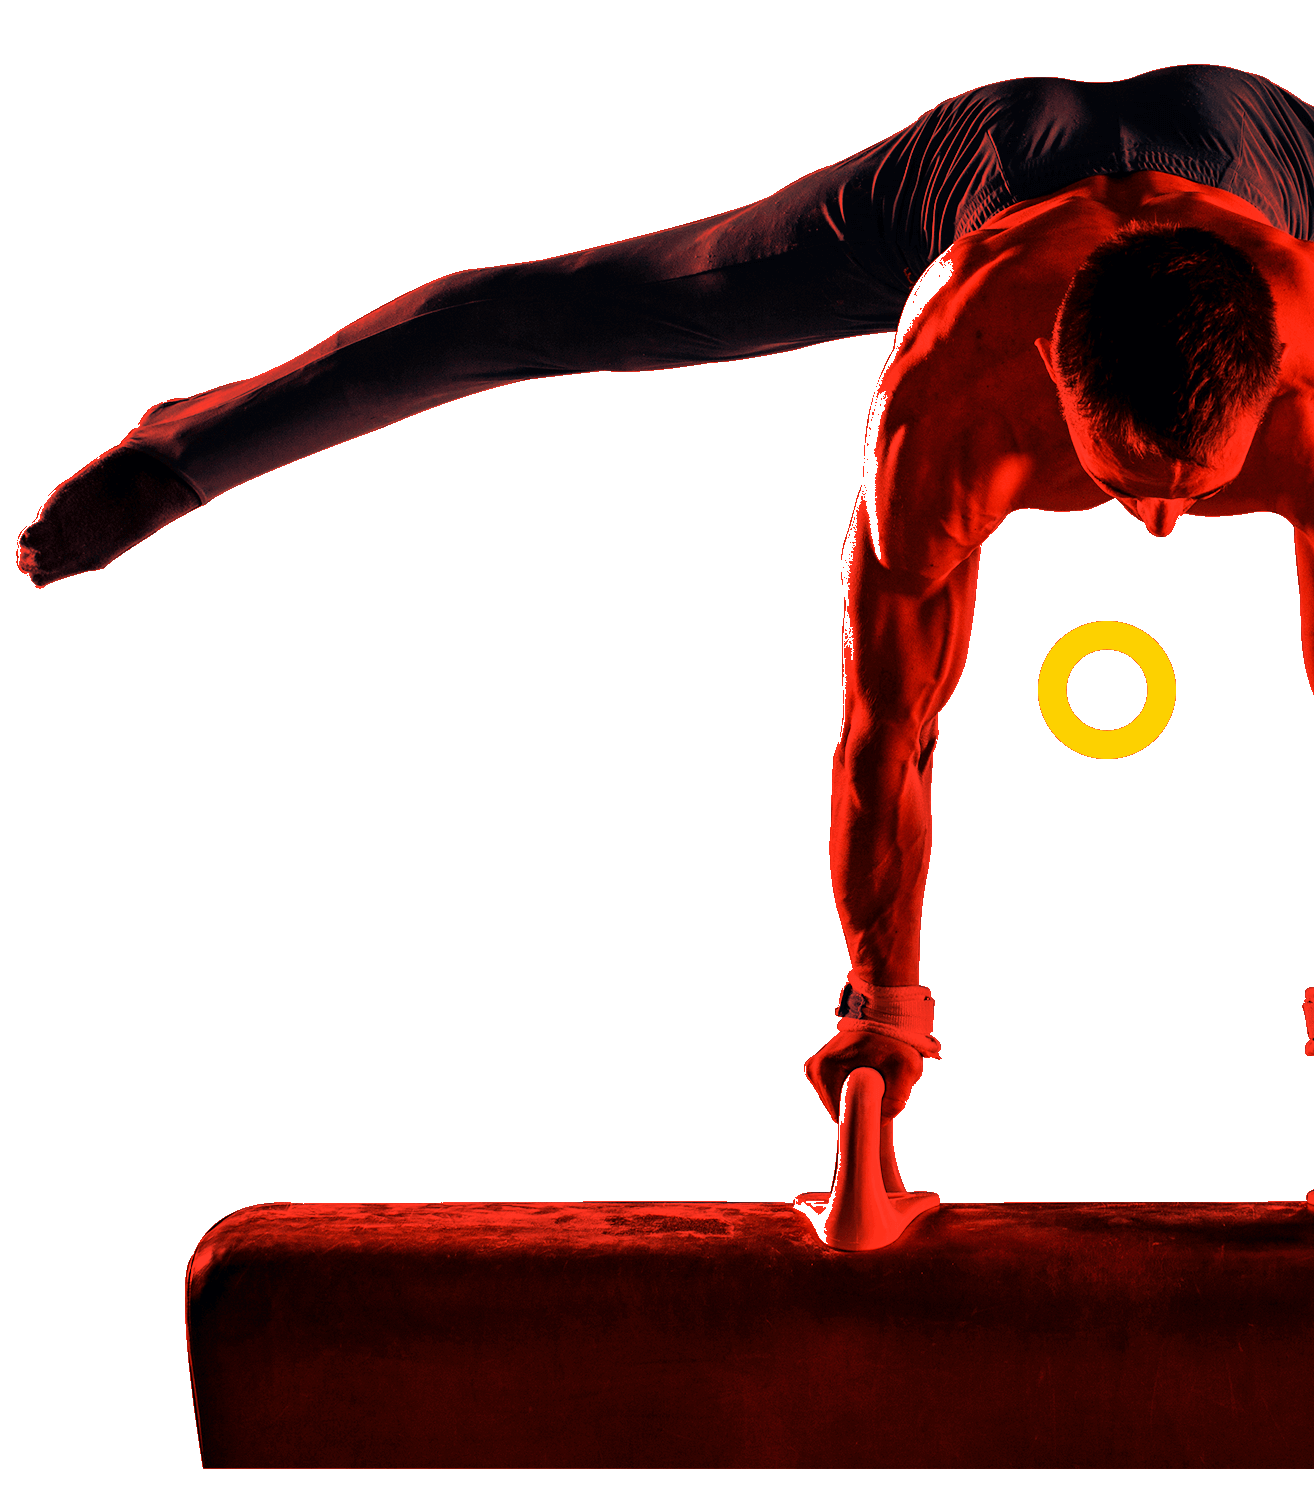 In the picture, a male gymnast executes his routine on the pommel horse. He is supported by his arms.